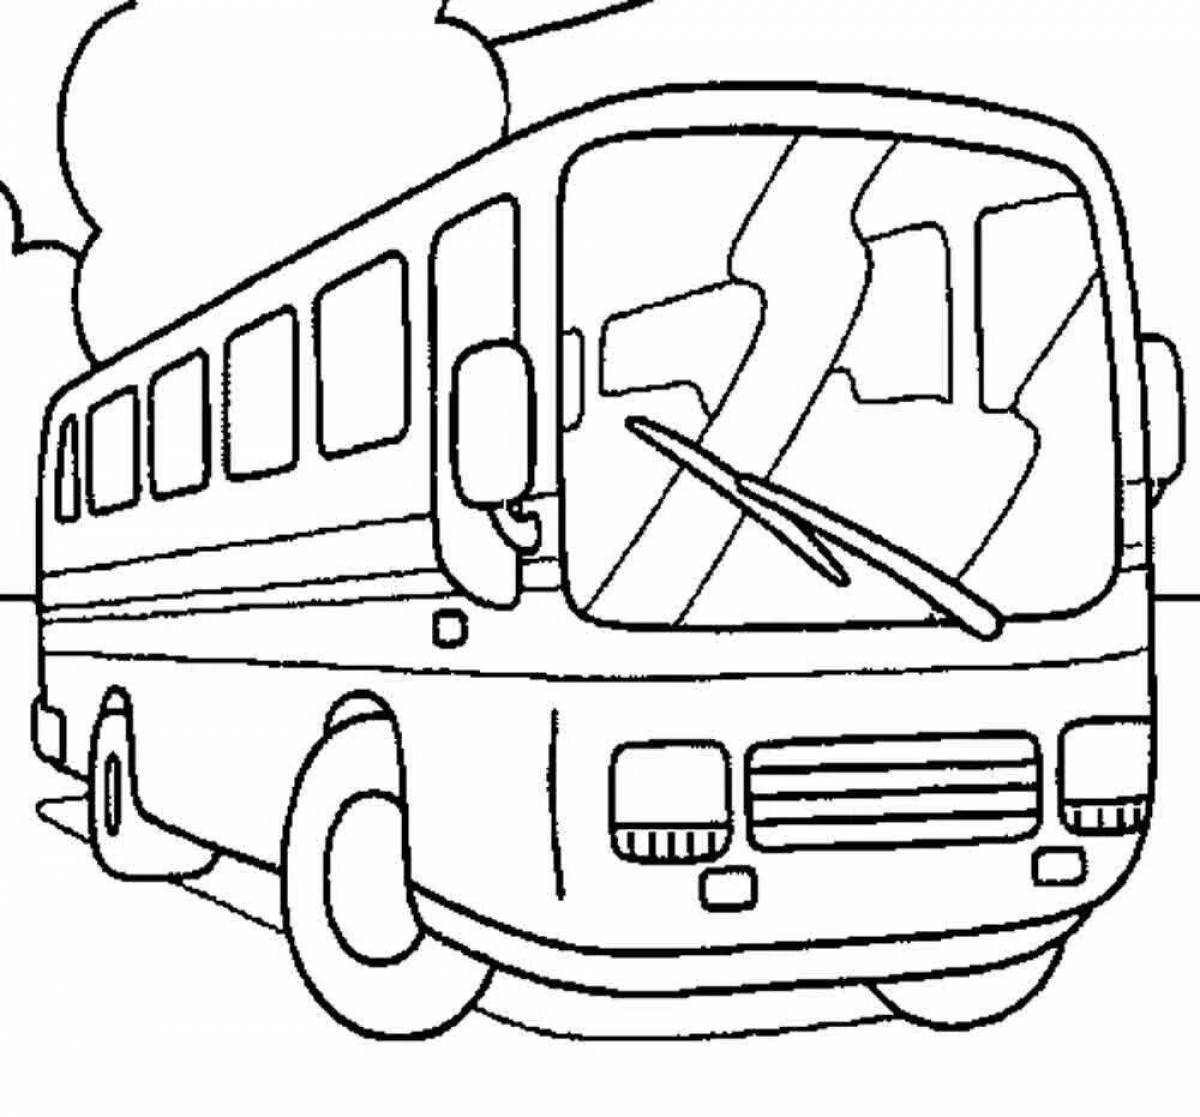 Fine cars and buses coloring book